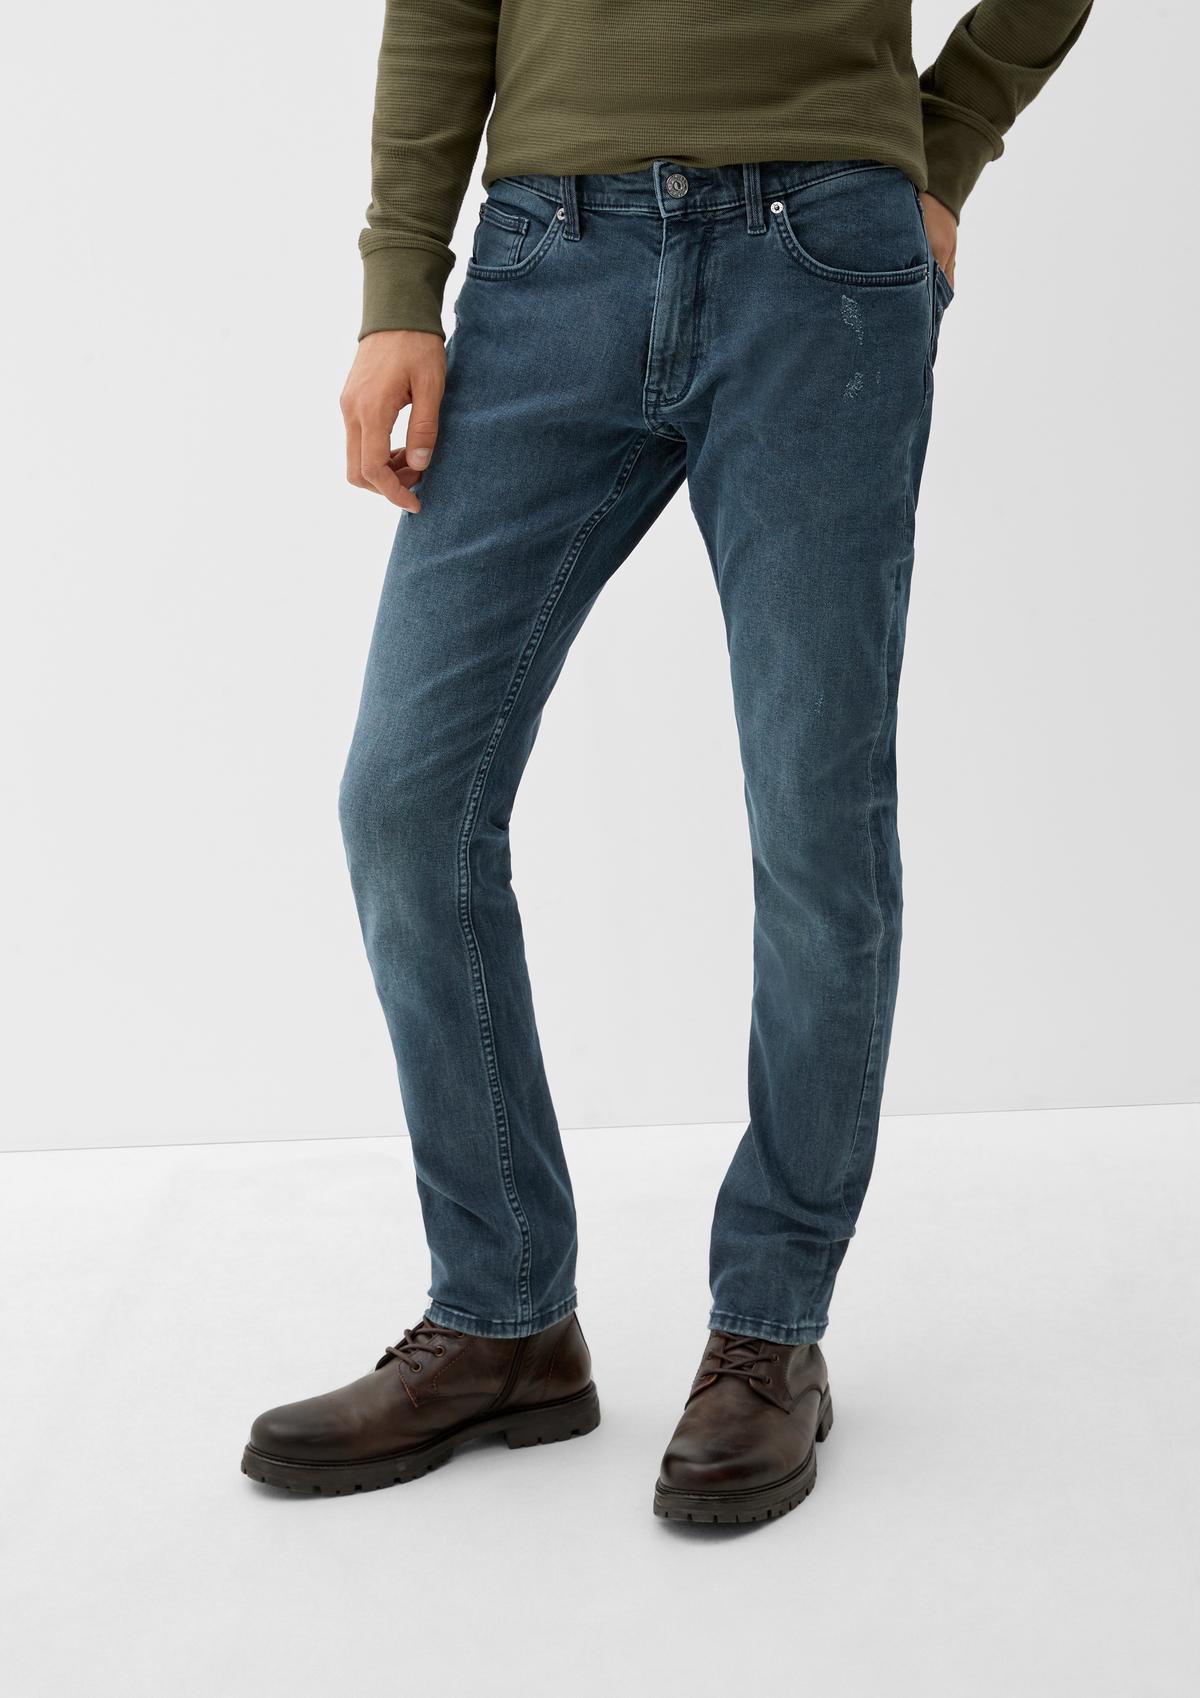 garment jeans Slim - light wash a with fit: blue